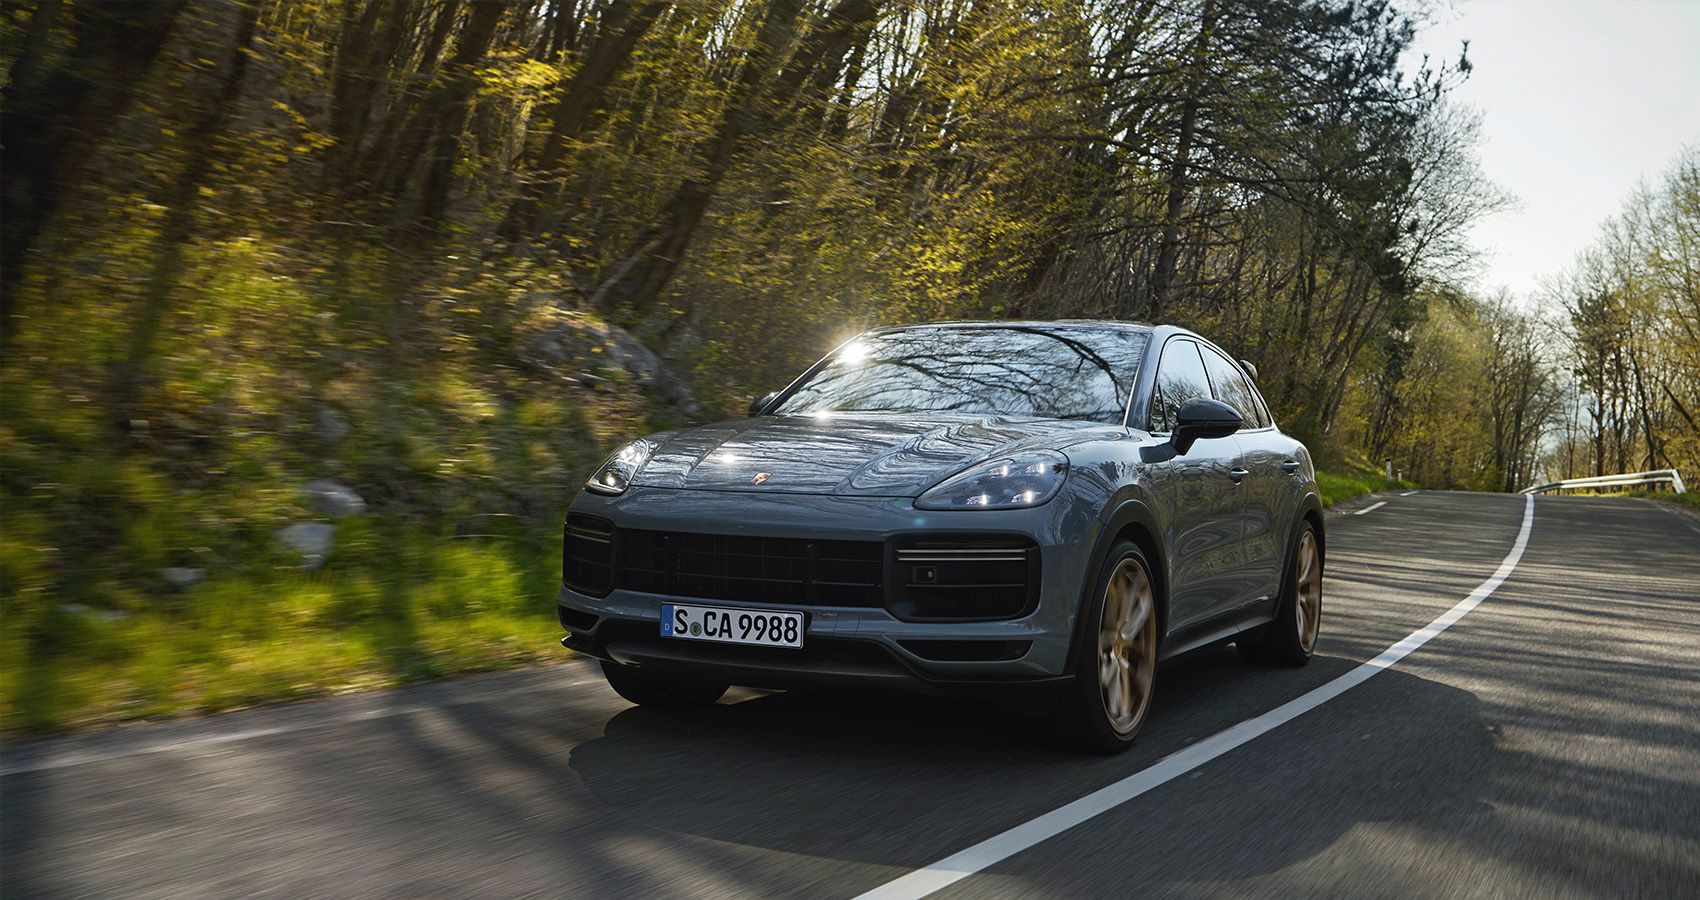 The front of the Cayenne Turbo GT on the road